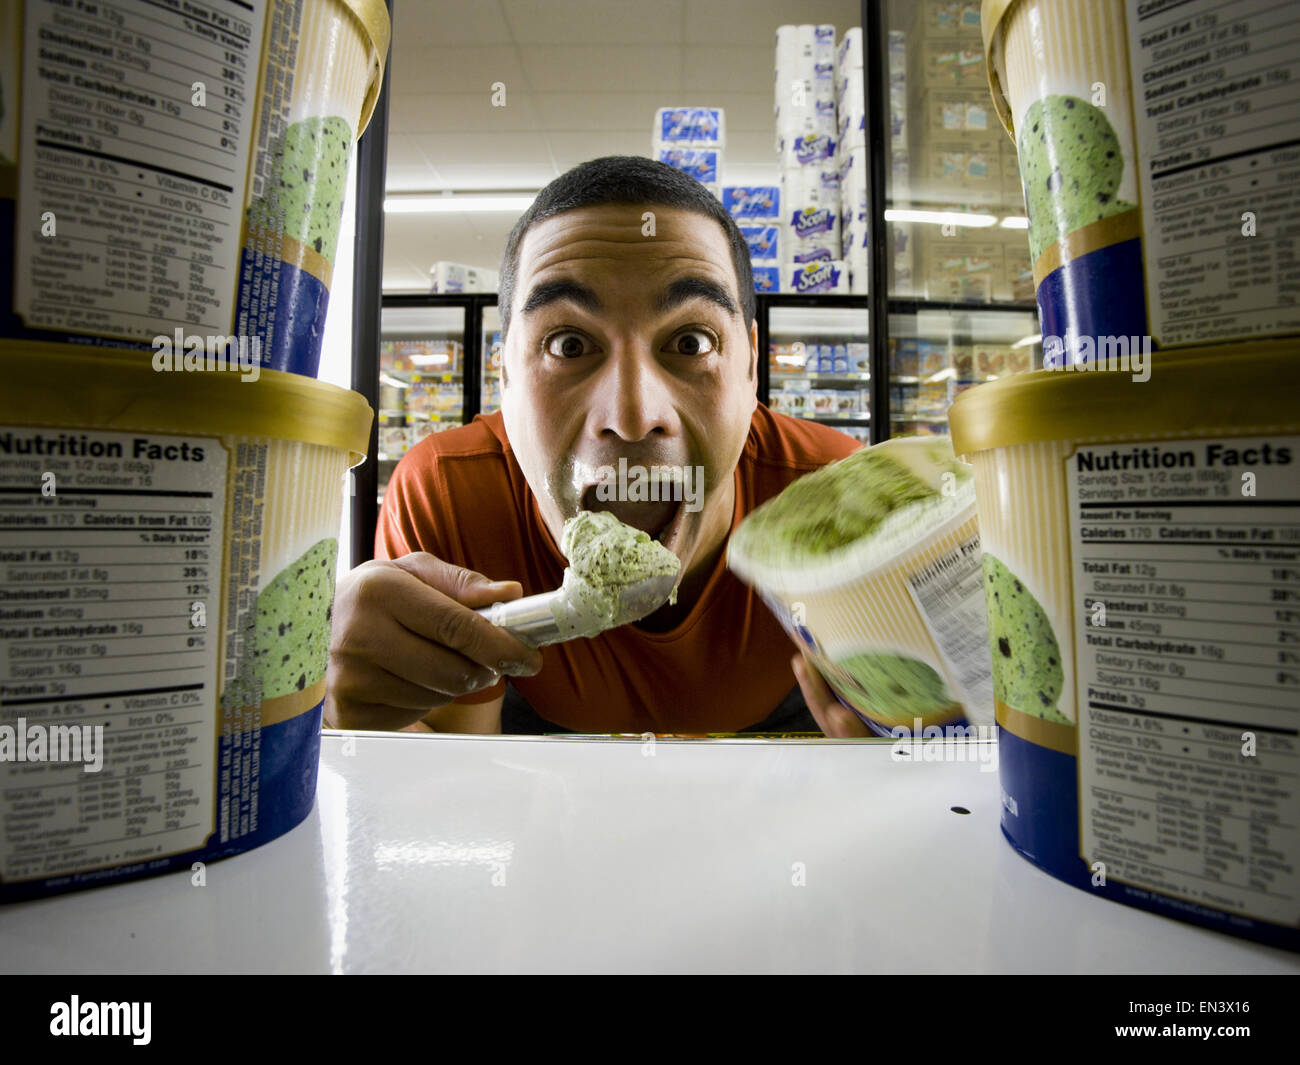 Man eating ice cream at grocery store Stock Photo